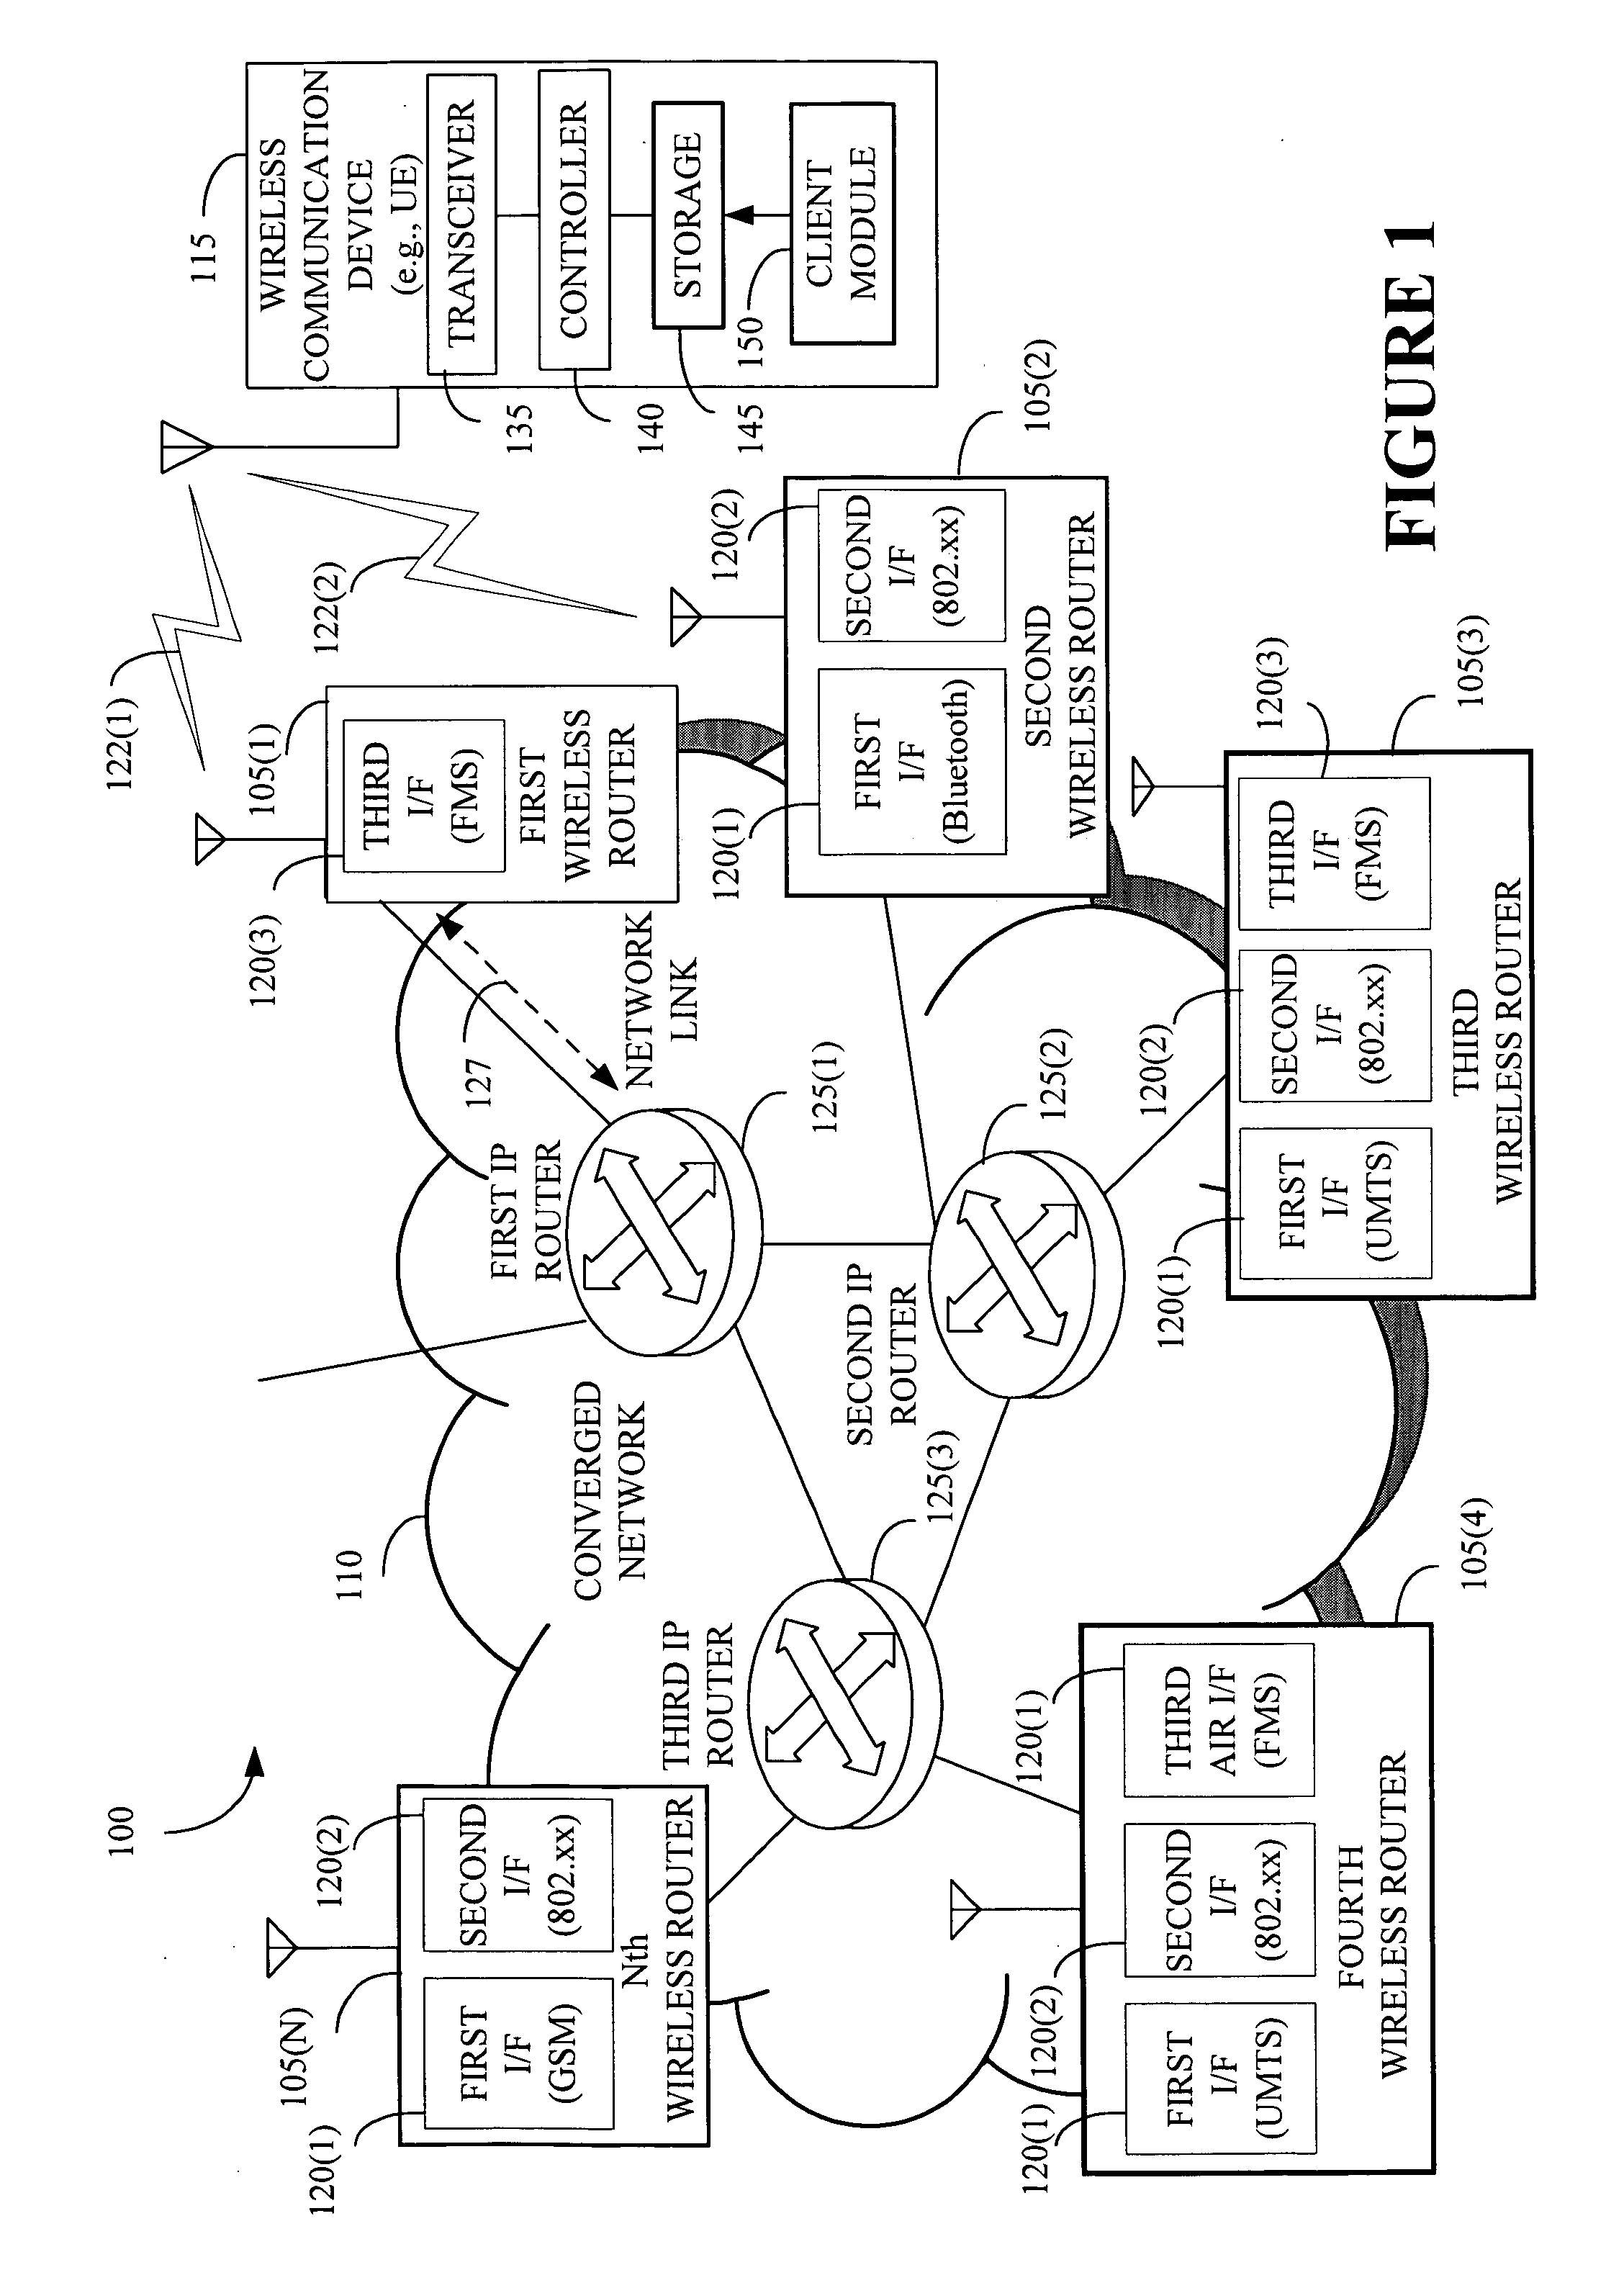 Managing internet protocol based resources in a packet-based access network